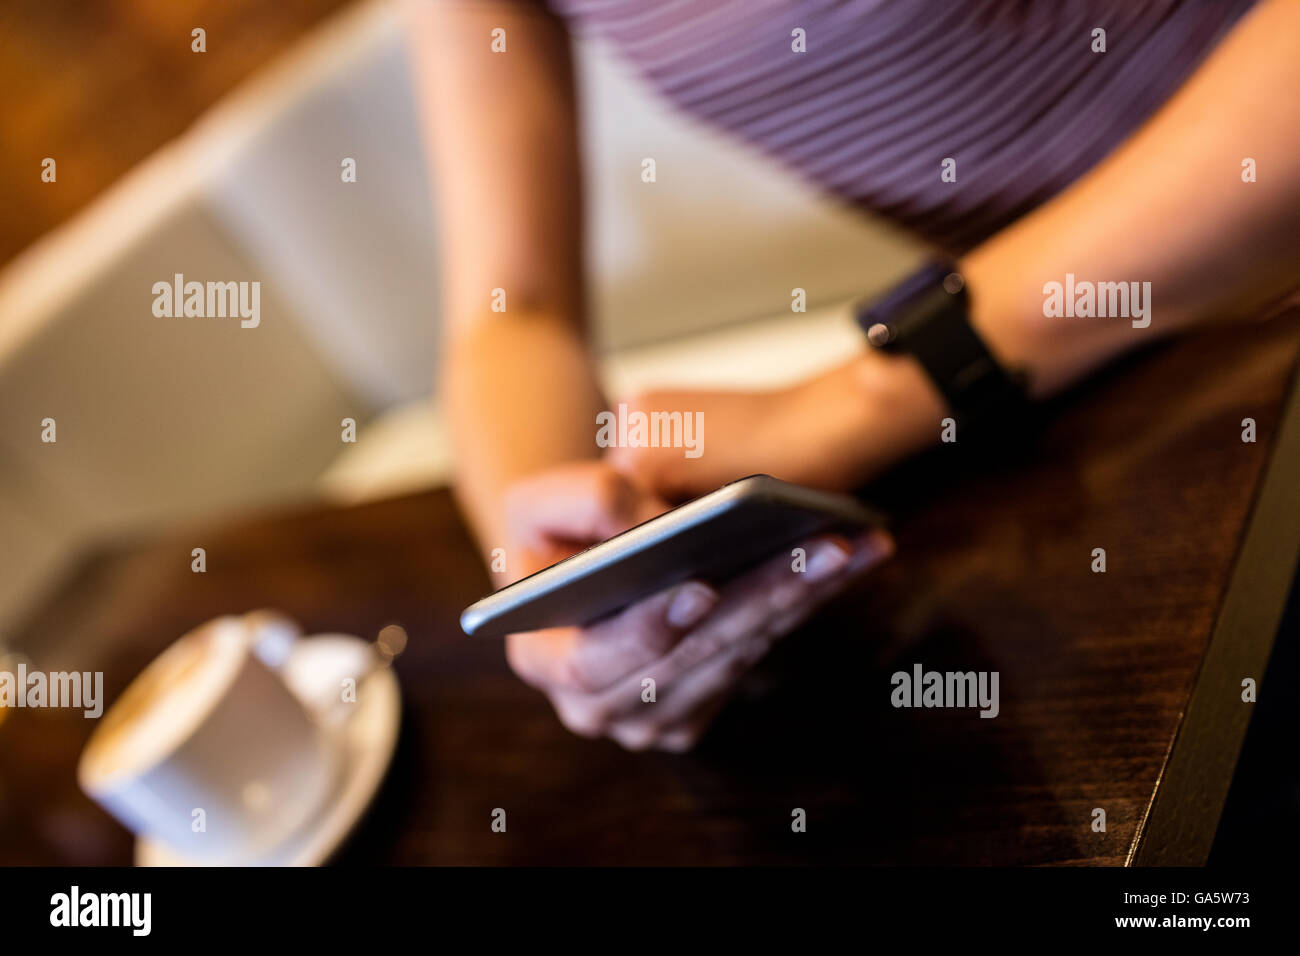 Midsection of woman using cellphone Stock Photo